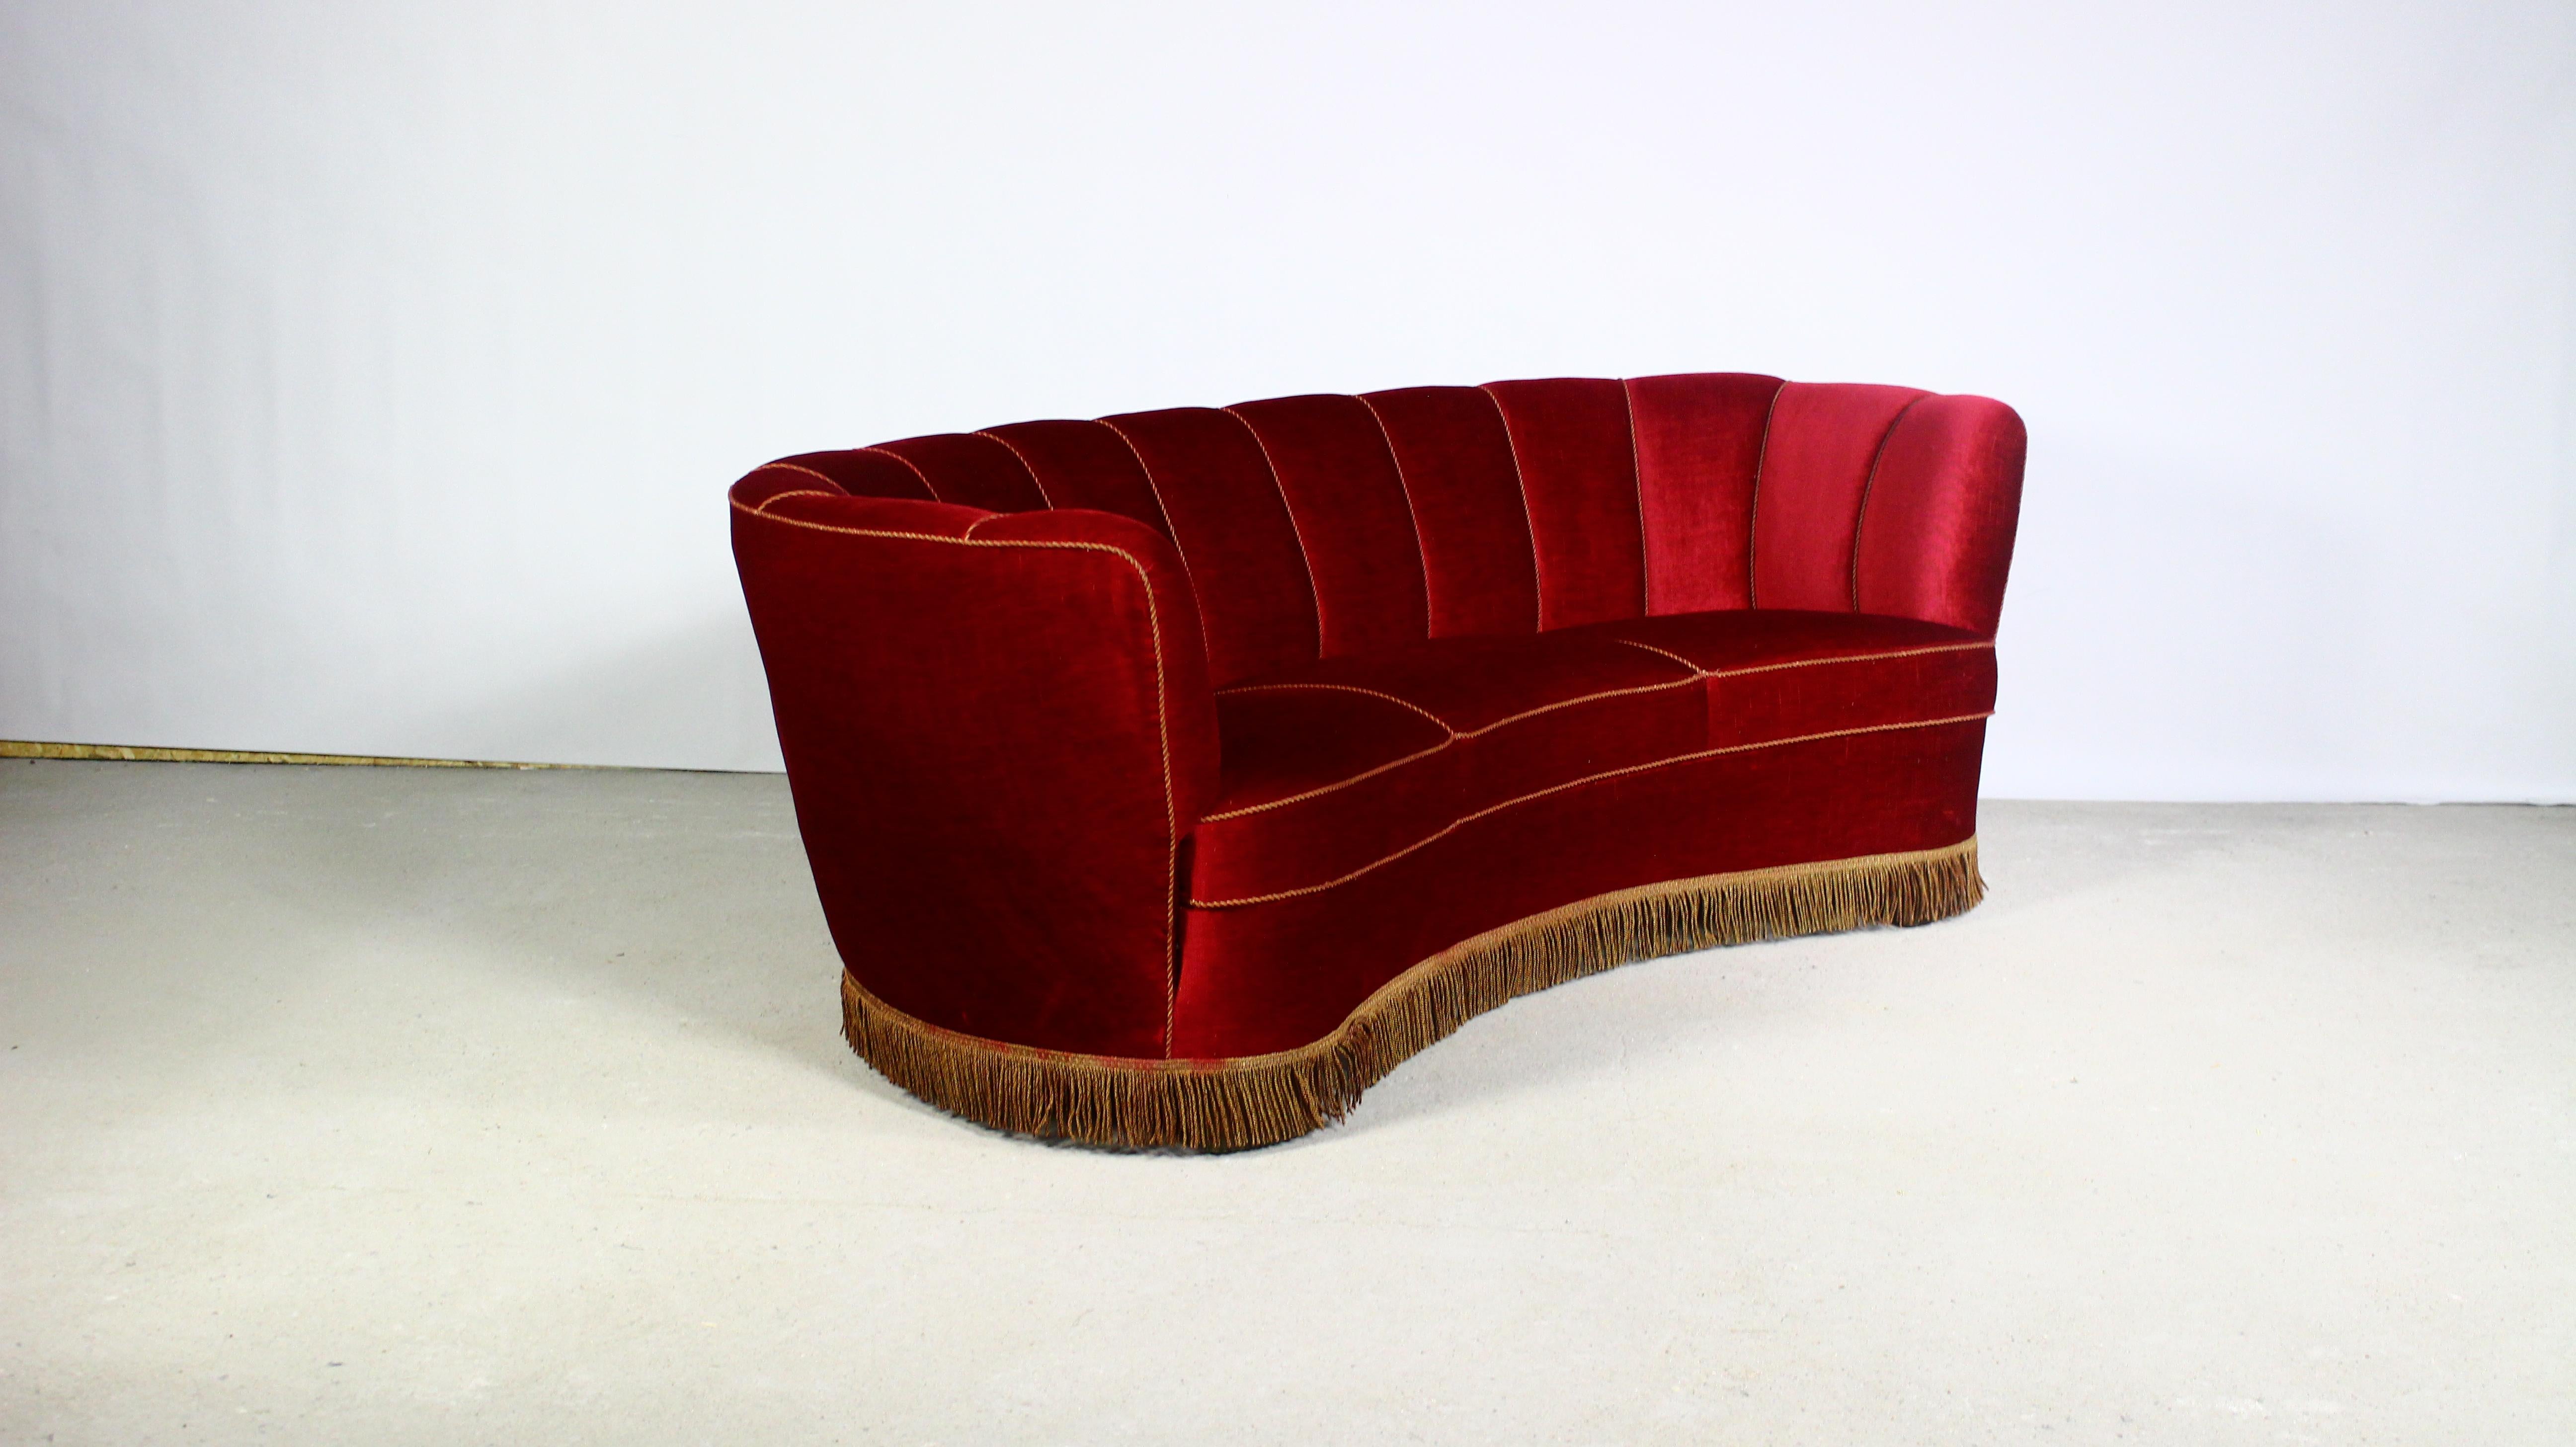 Danish Art Deco Banana Sofa from 1940s.
This beautiful three-seater sofa recalls the Art Deco style of the 1930s with the recognizable touch of Danish Modernism.
Thanks to its elegantly curved shape,
this type of sofa is often referred to as the